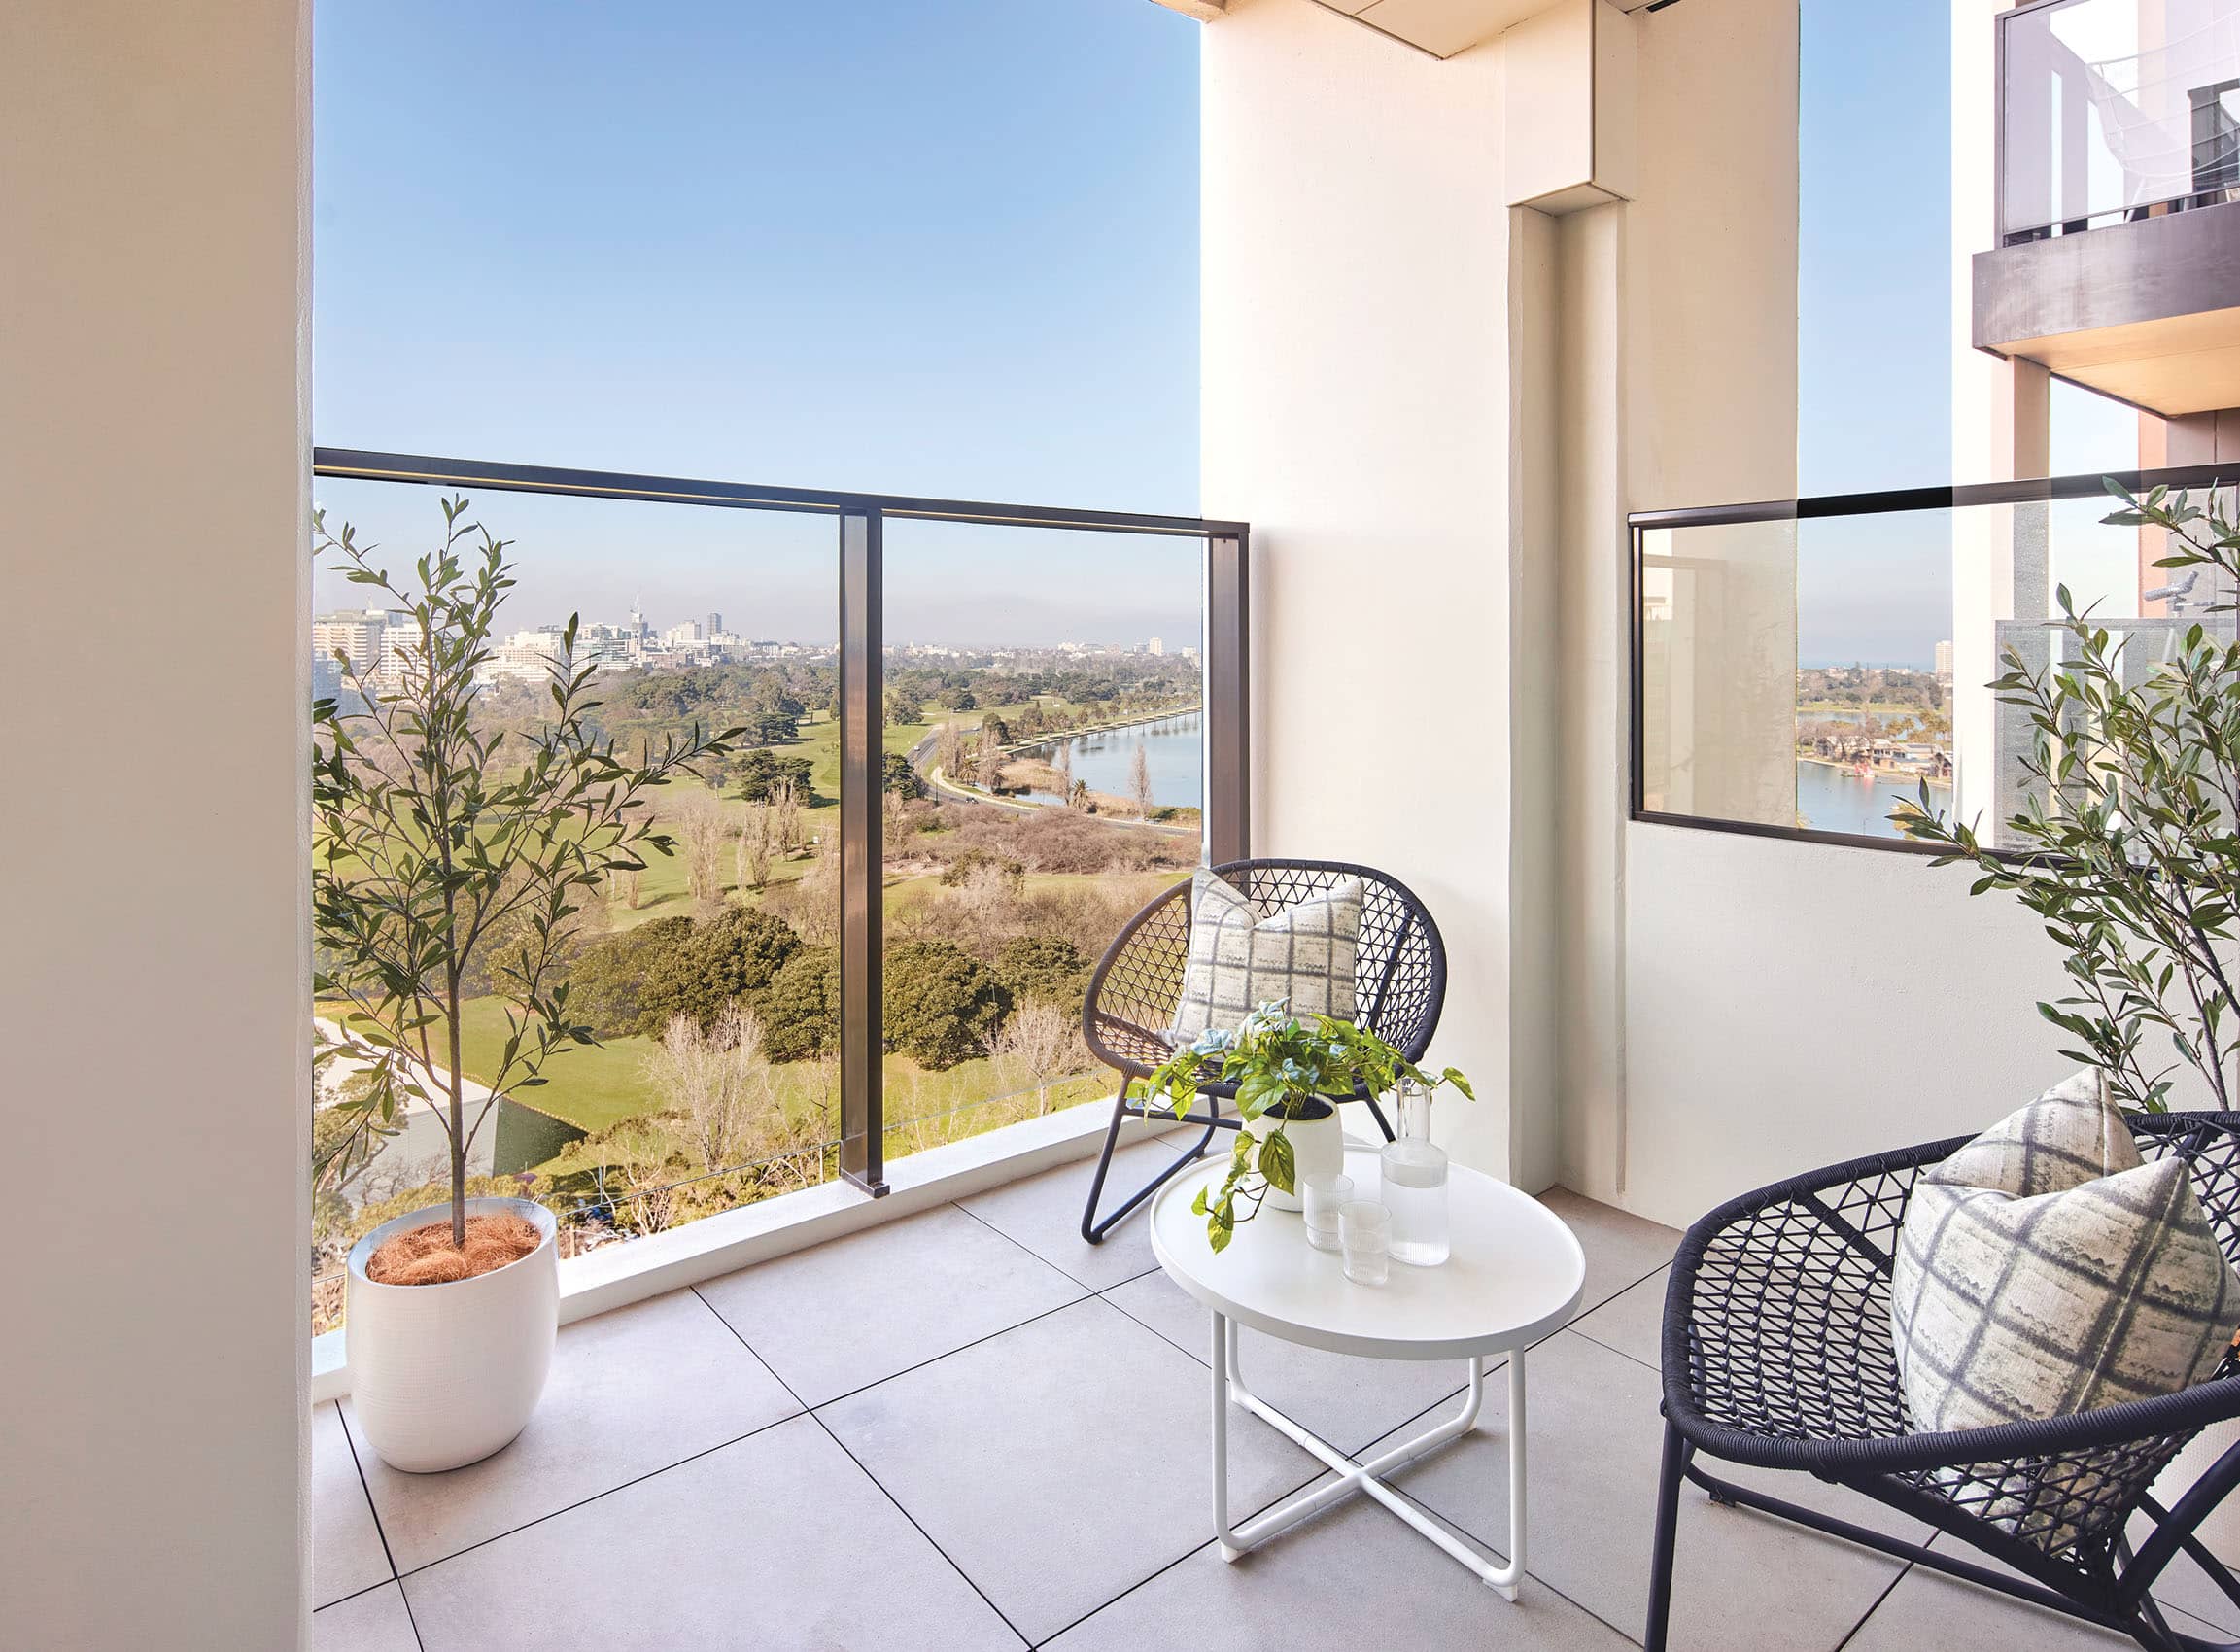 Many apartments have private balconies to enjoy the views from.